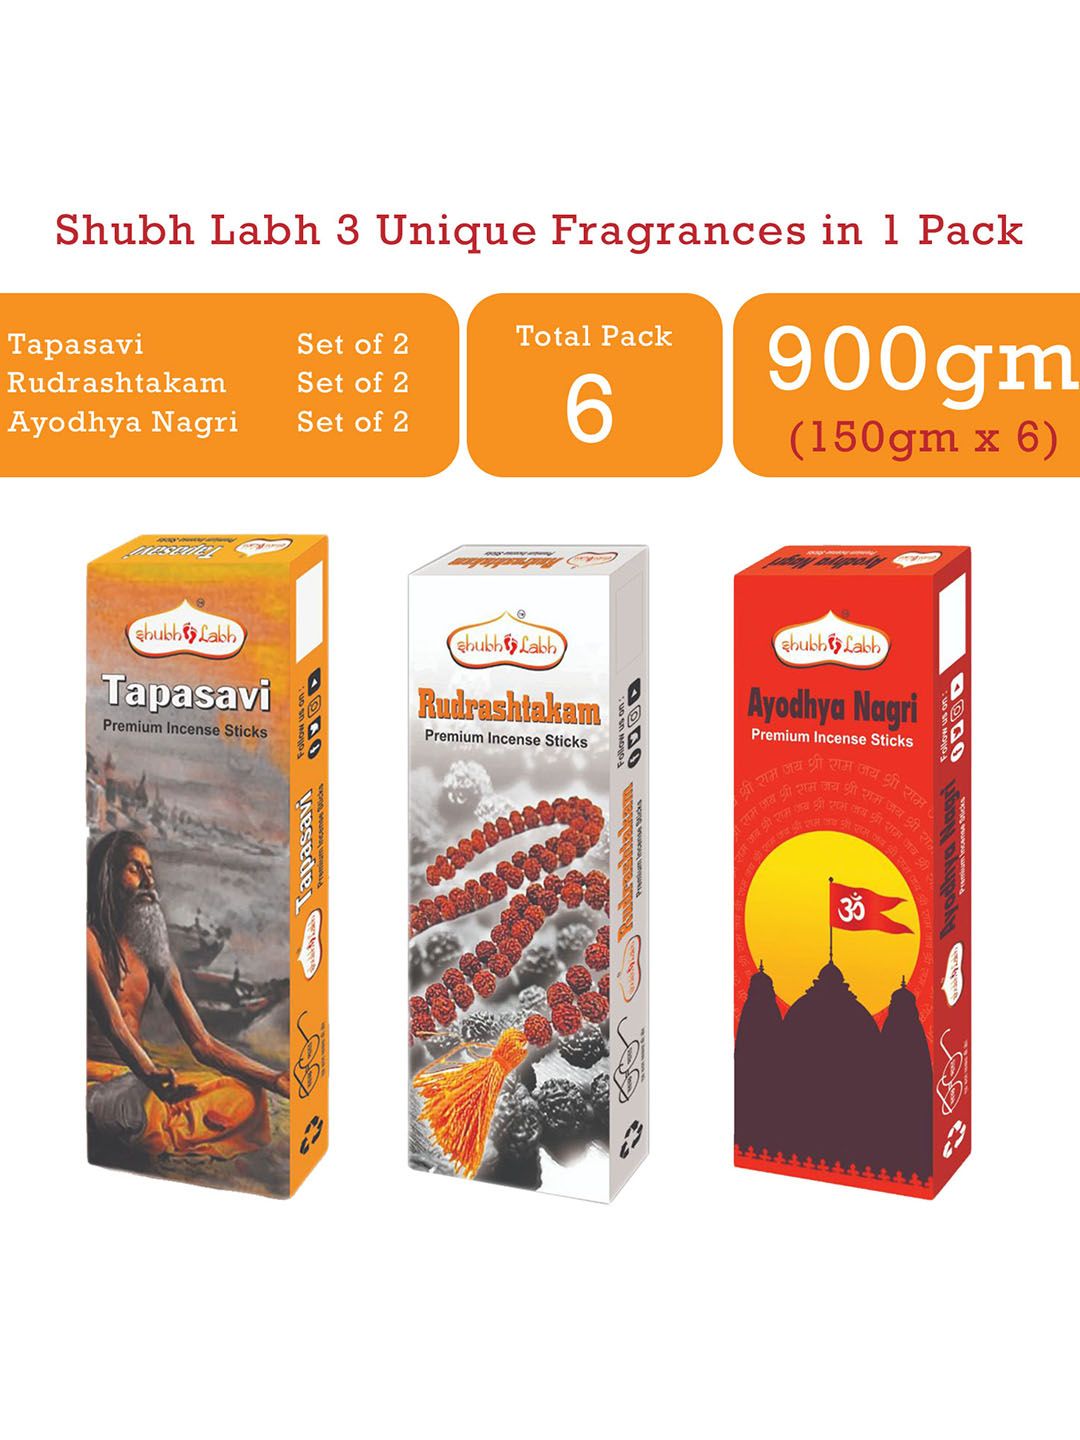 Shubh Labh Pack Of 6 Incense Sticks Price in India